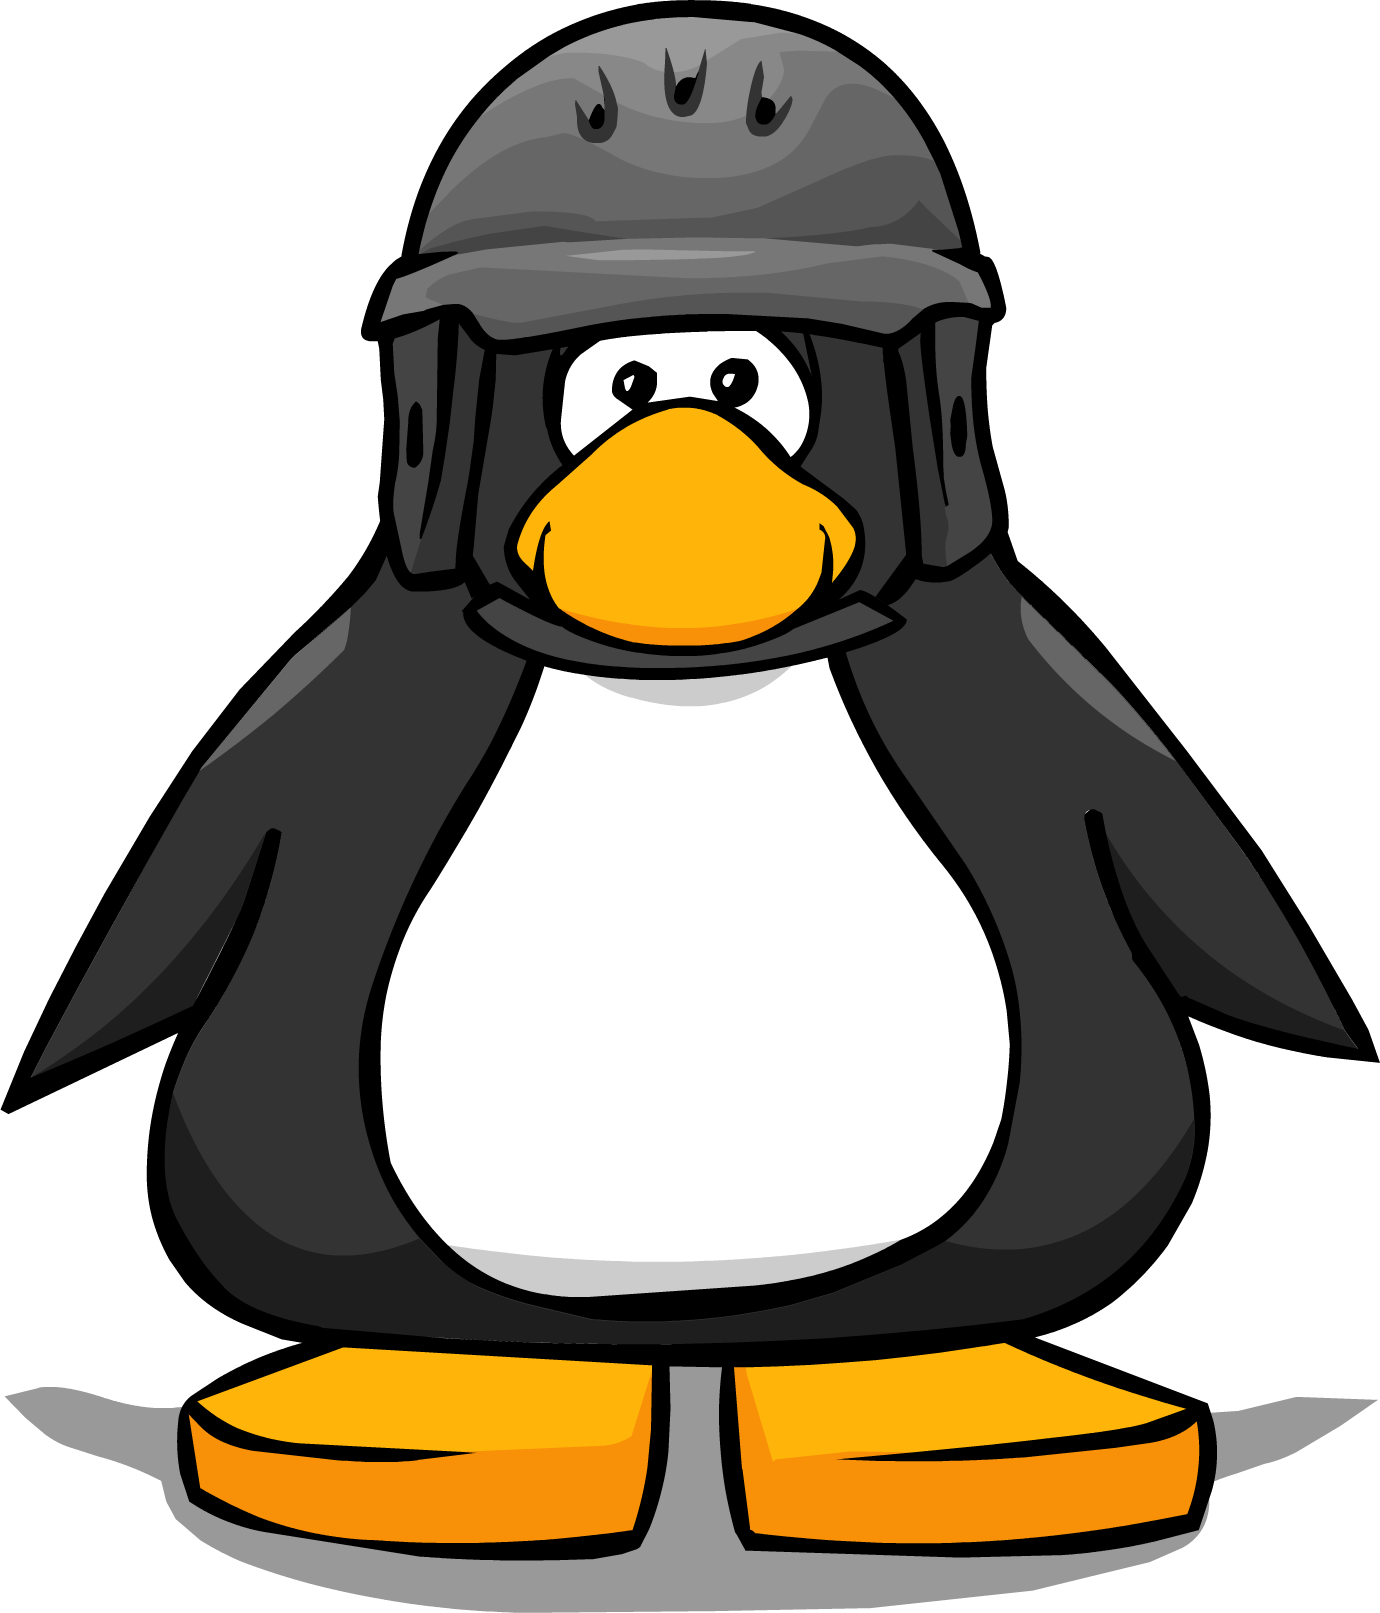 Snowboard Helmet445566 - Png - Club Penguin With Hat (1380x1613)